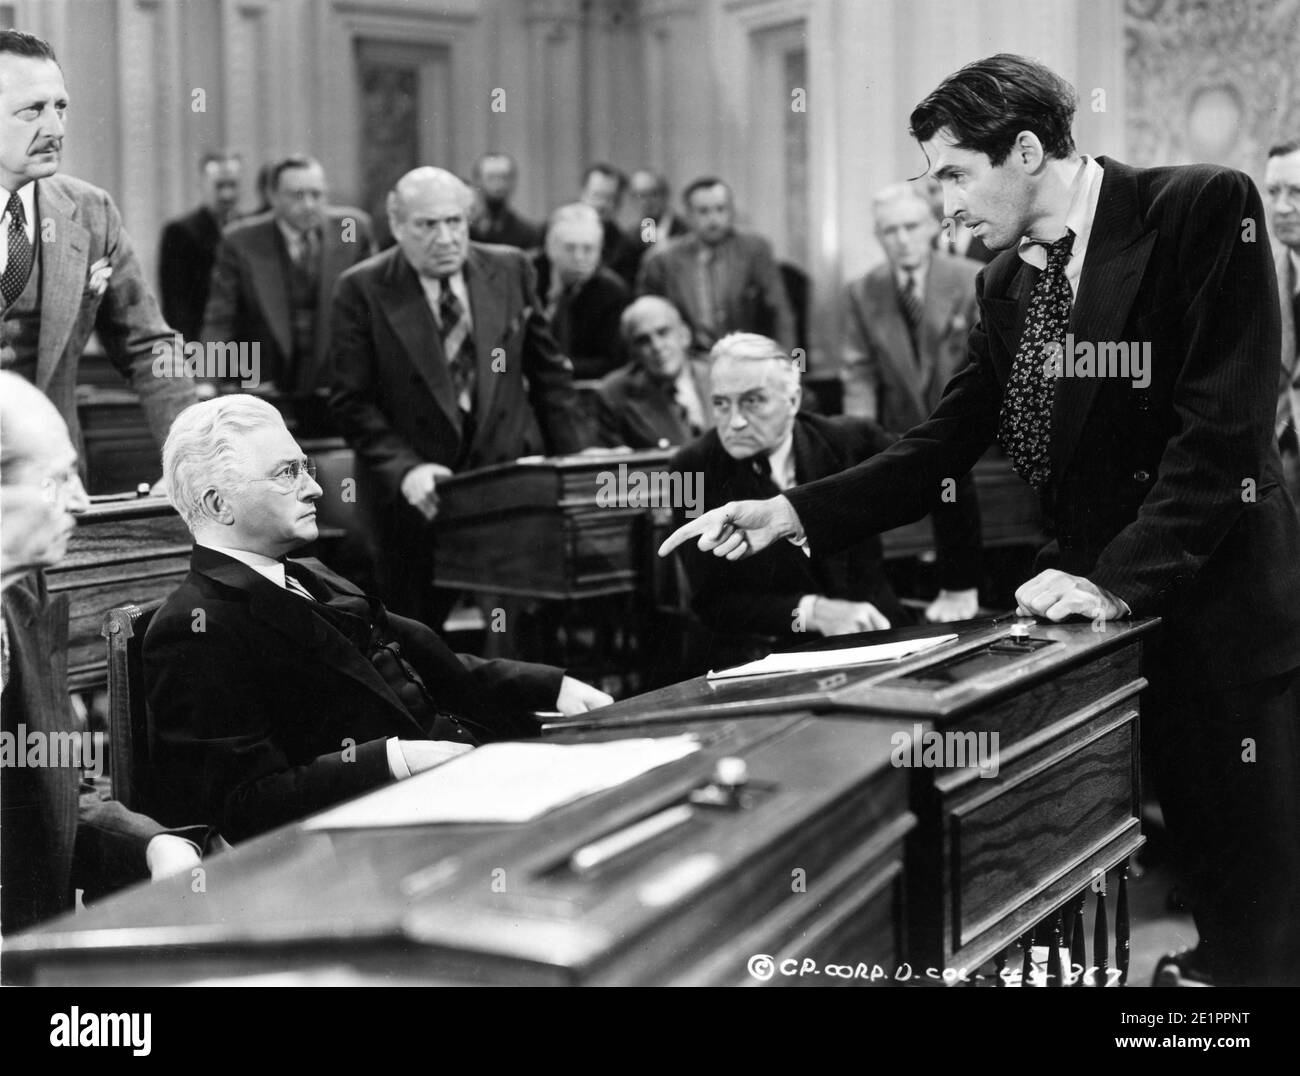 CLAUDE RAINS and JAMES STEWART in MR. SMITH GOES TO WASHINGTON 1939 director FRANK CAPRA story Lewis R. Foster screenplay Sidney Buchman Columbia Pictures Stock Photo